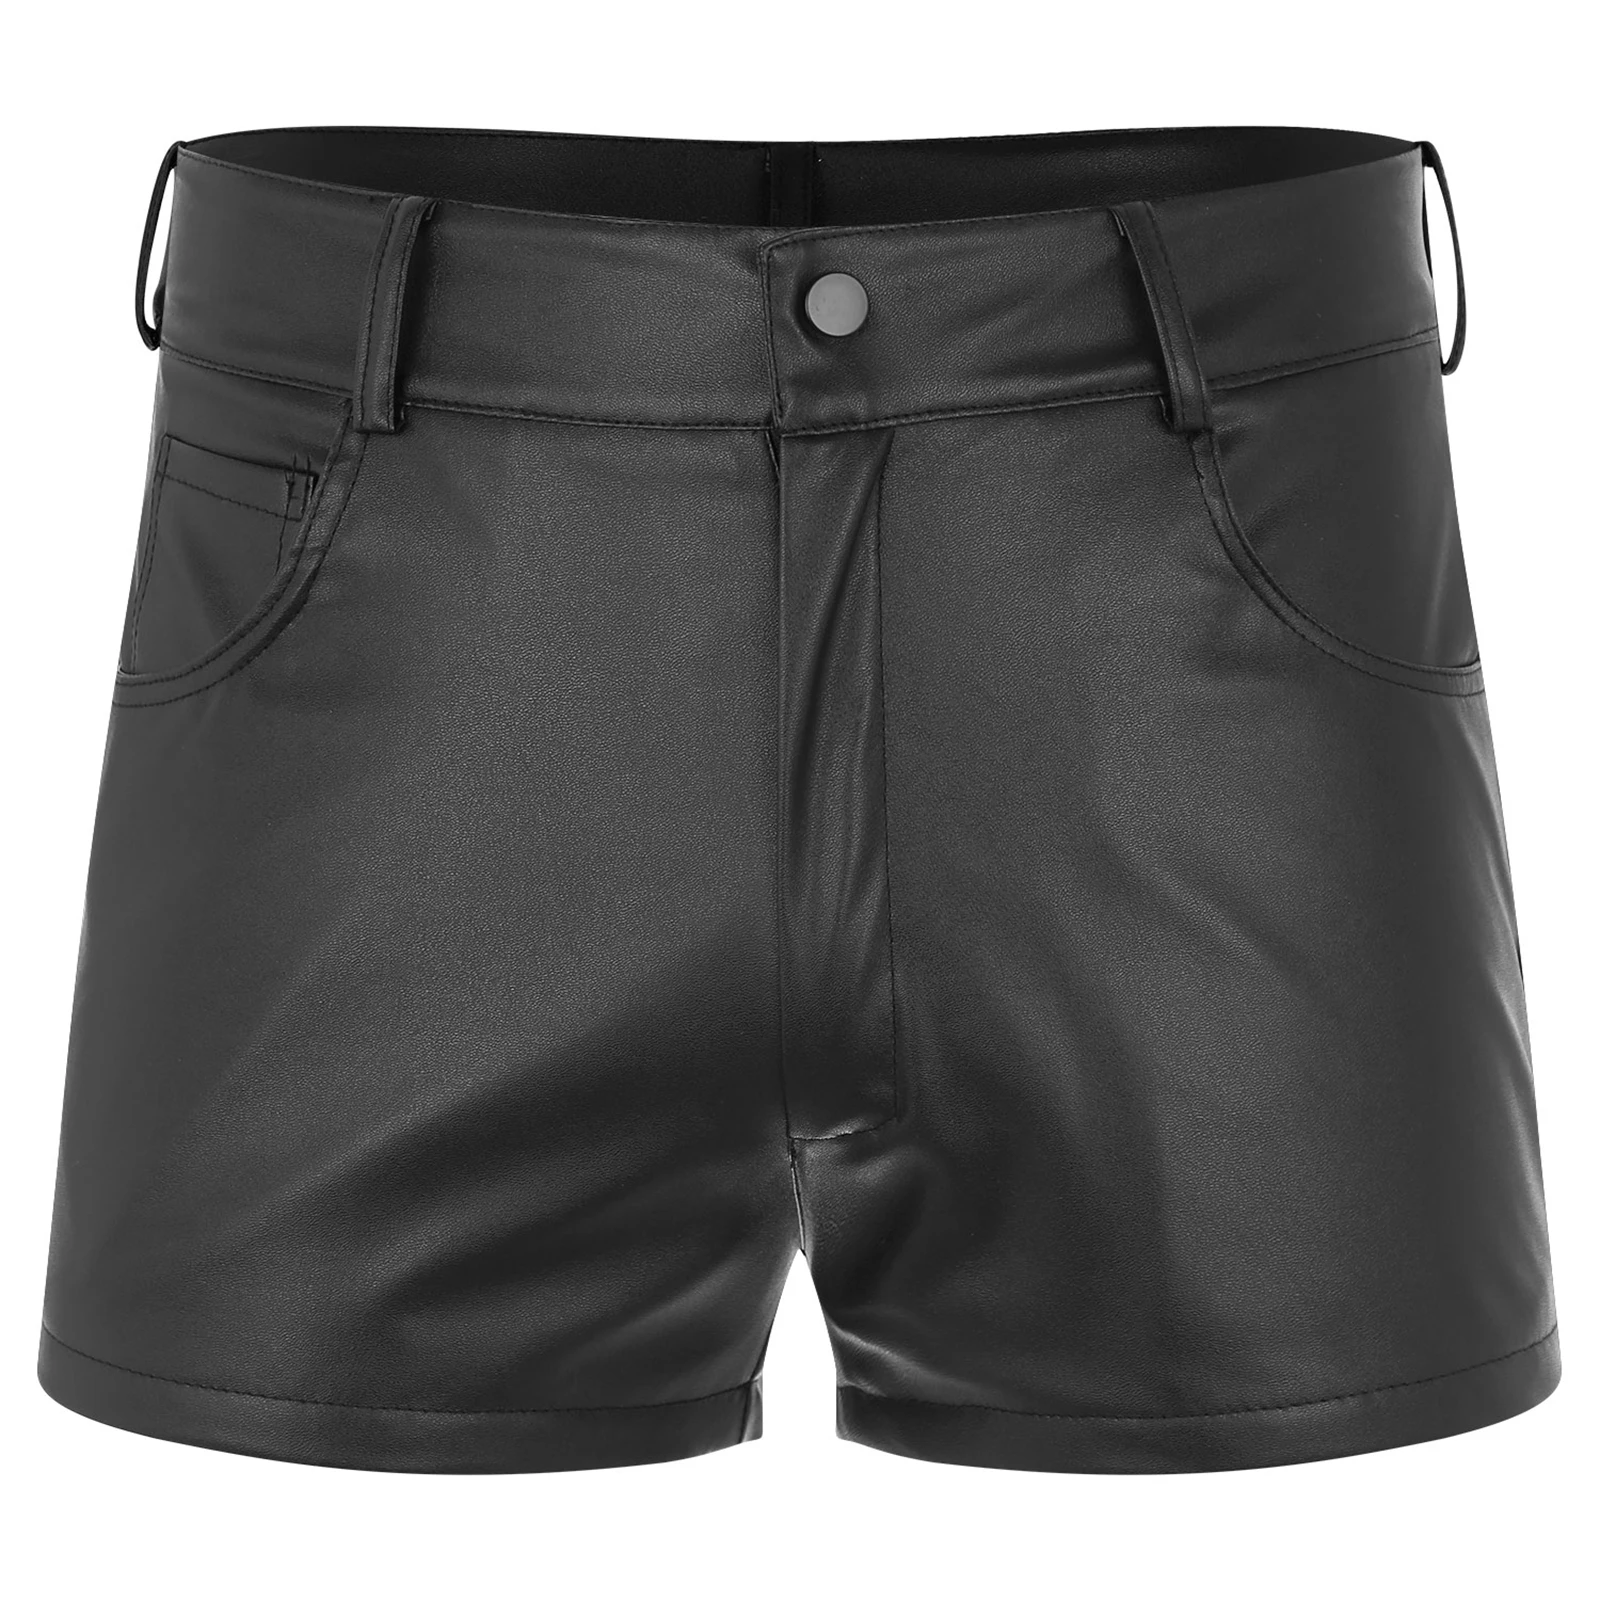 

Mens Fashion PU Shorts Rave Party Nightclub Hot Pants for Pole Dancing Stage Performance Rock Concert Music Festival Clubwear